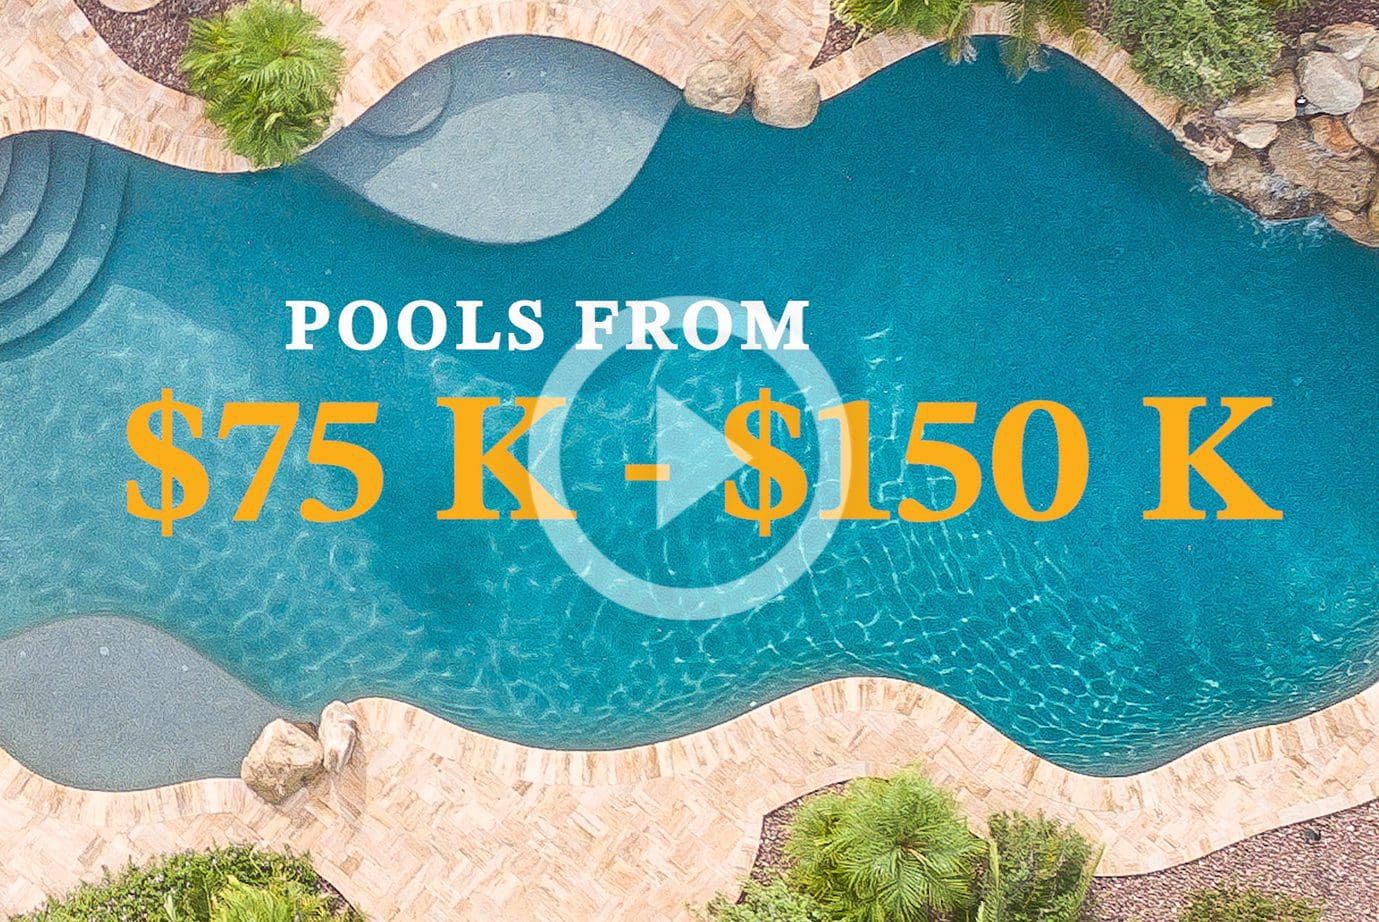 What Type Of Pool Can I Get If My Budget Is $75 K – $150 K?